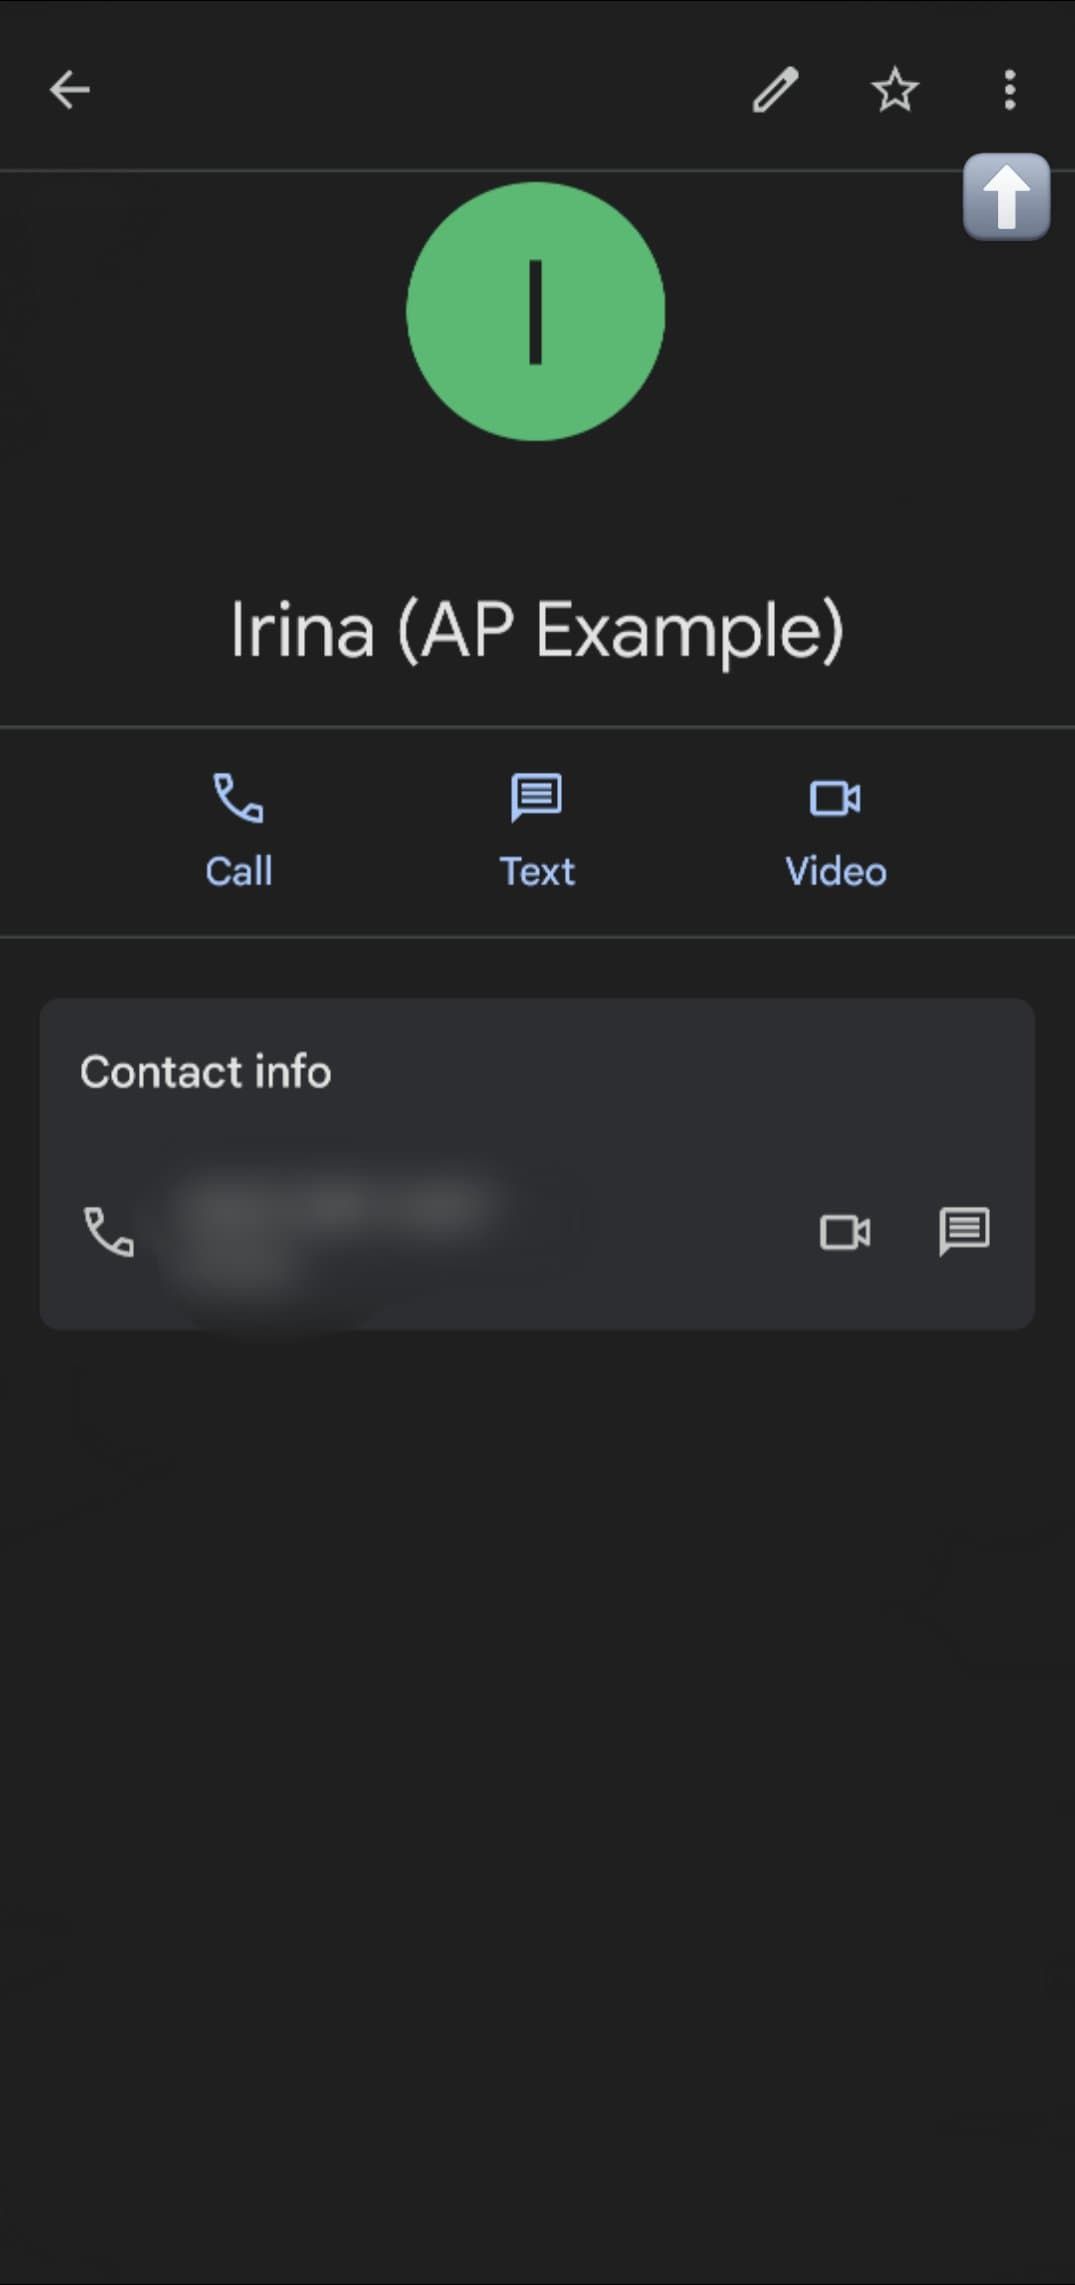 Image shows the example contact details screen with an arrow pointing to the triple dots in the top right.